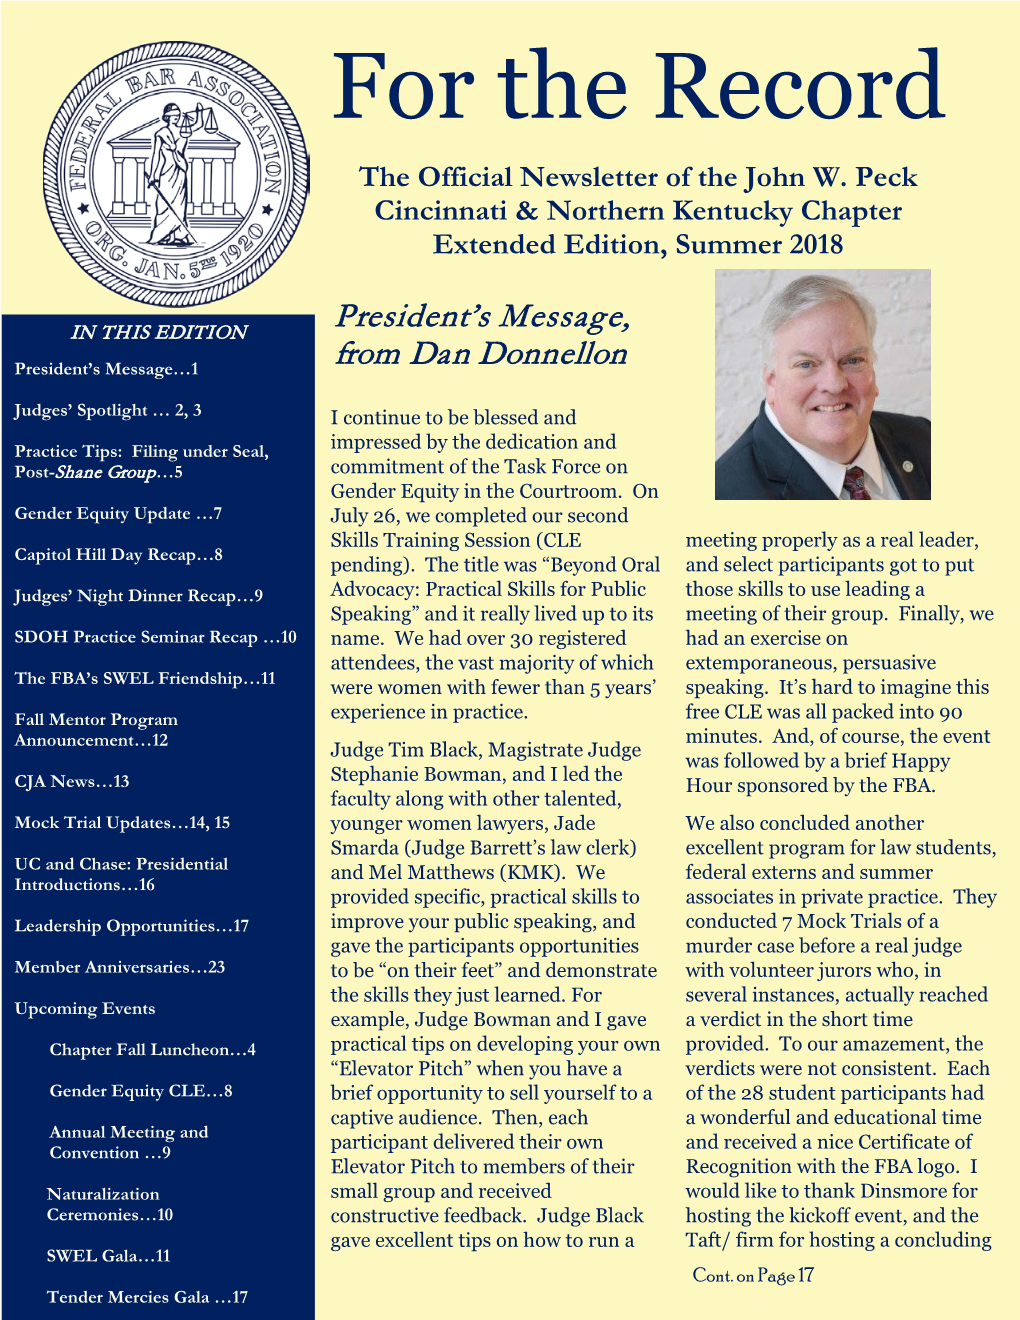 For the Record the Official Newsletter of the John W